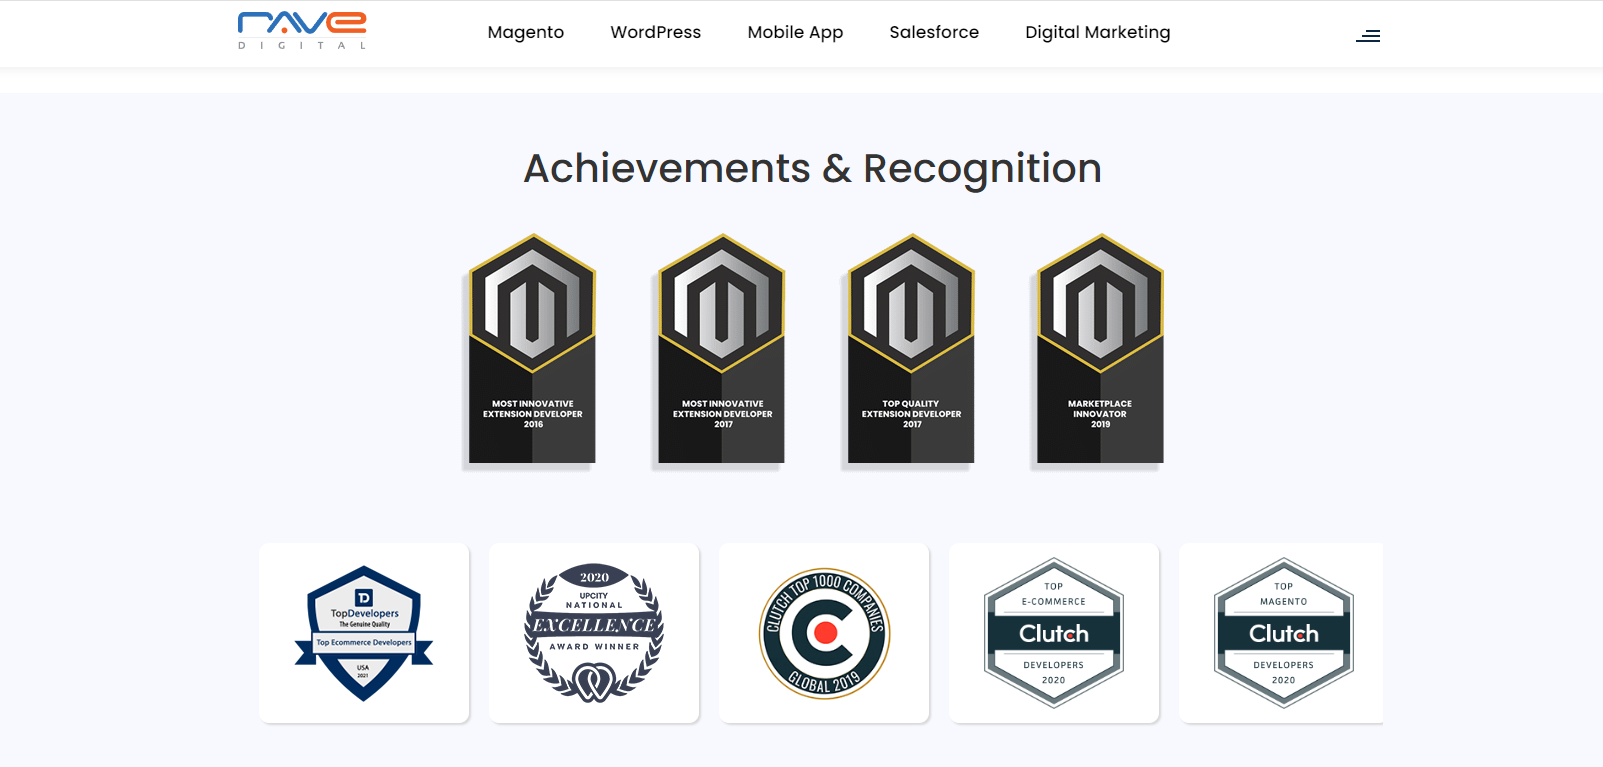 Rave Digital is a top-rated Magento Certified